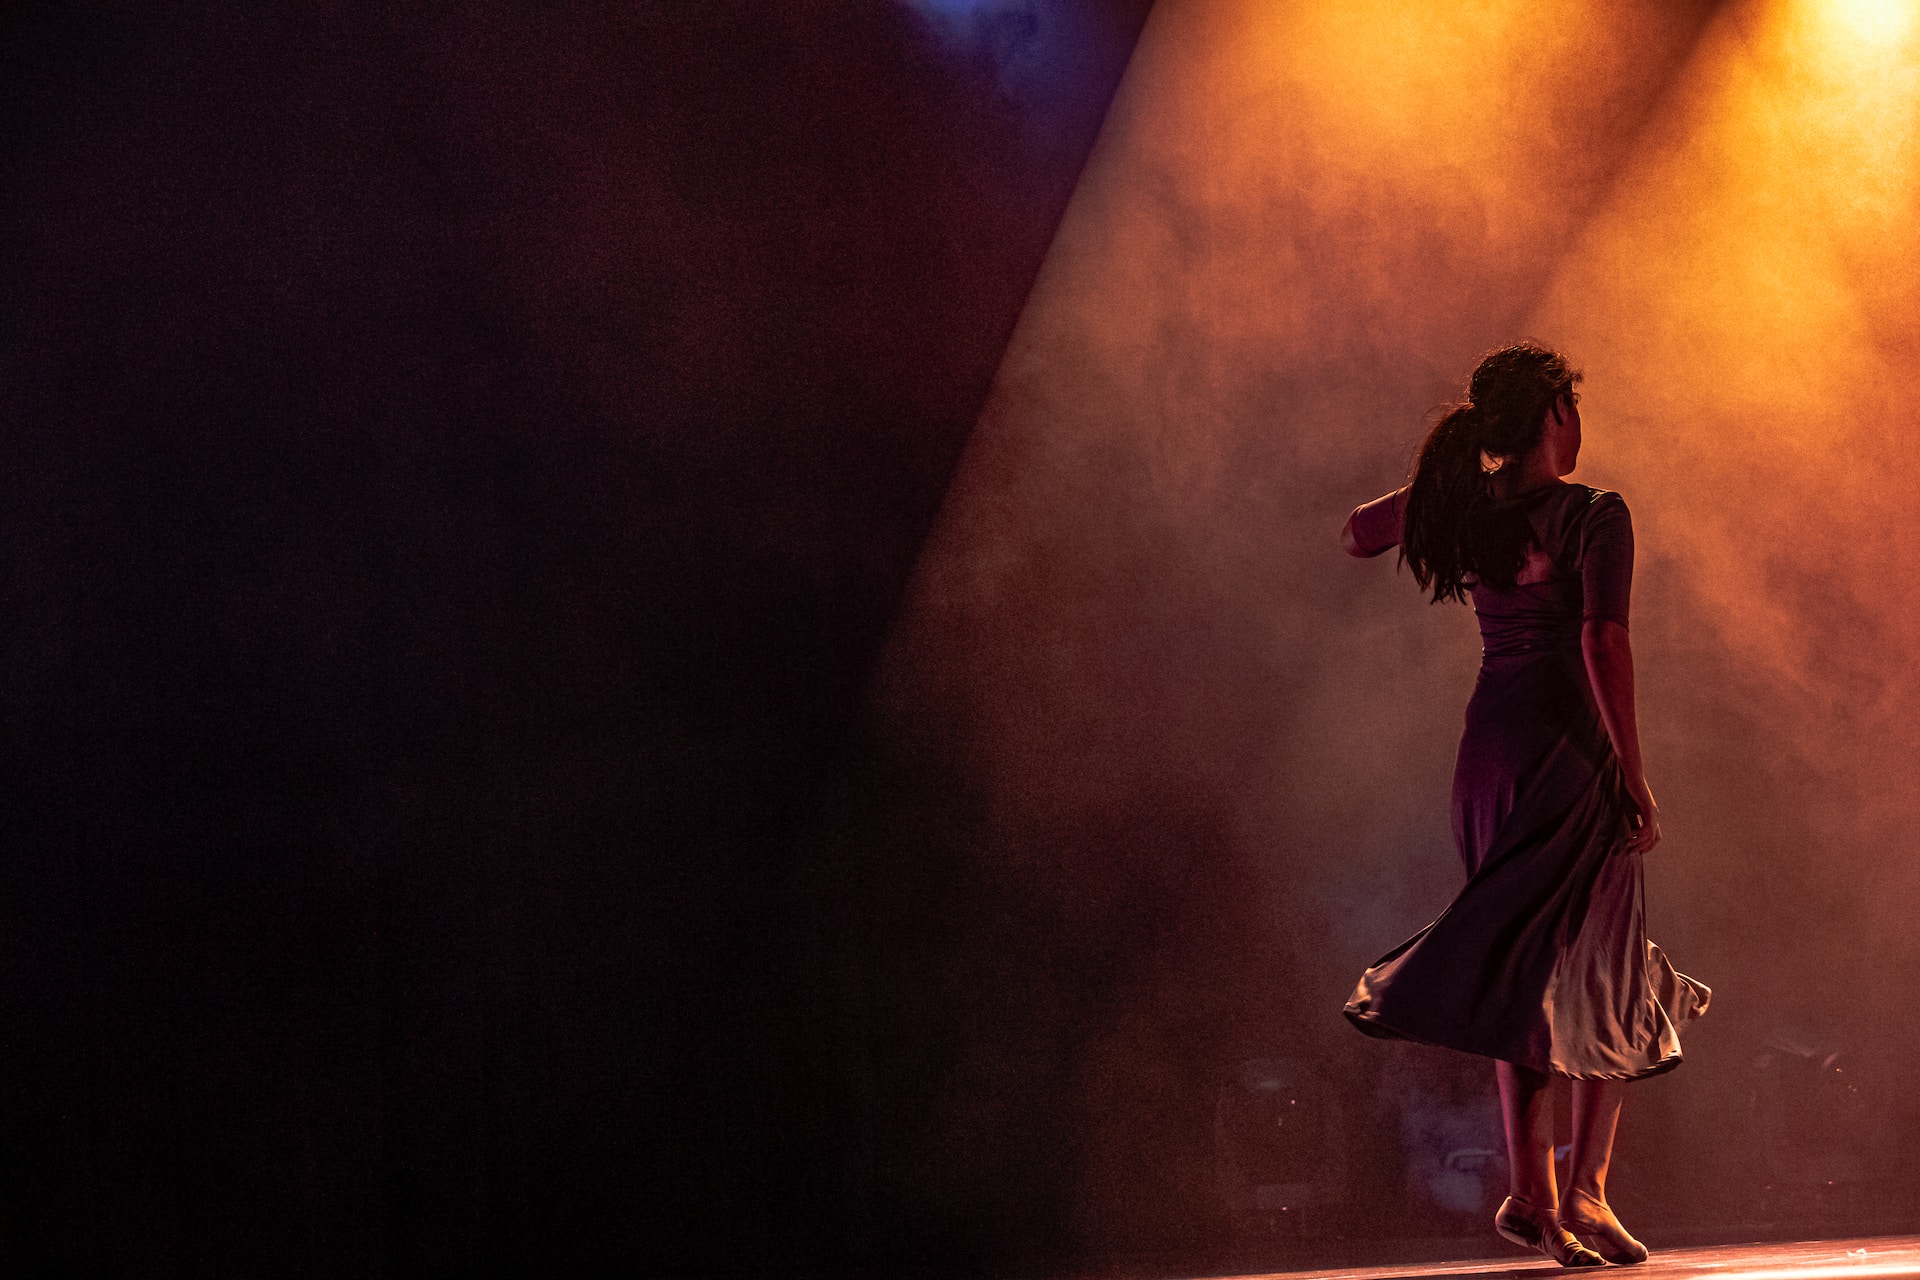 Female dancers on stage for a story based performance amid beautiful light effects and graceful movement.